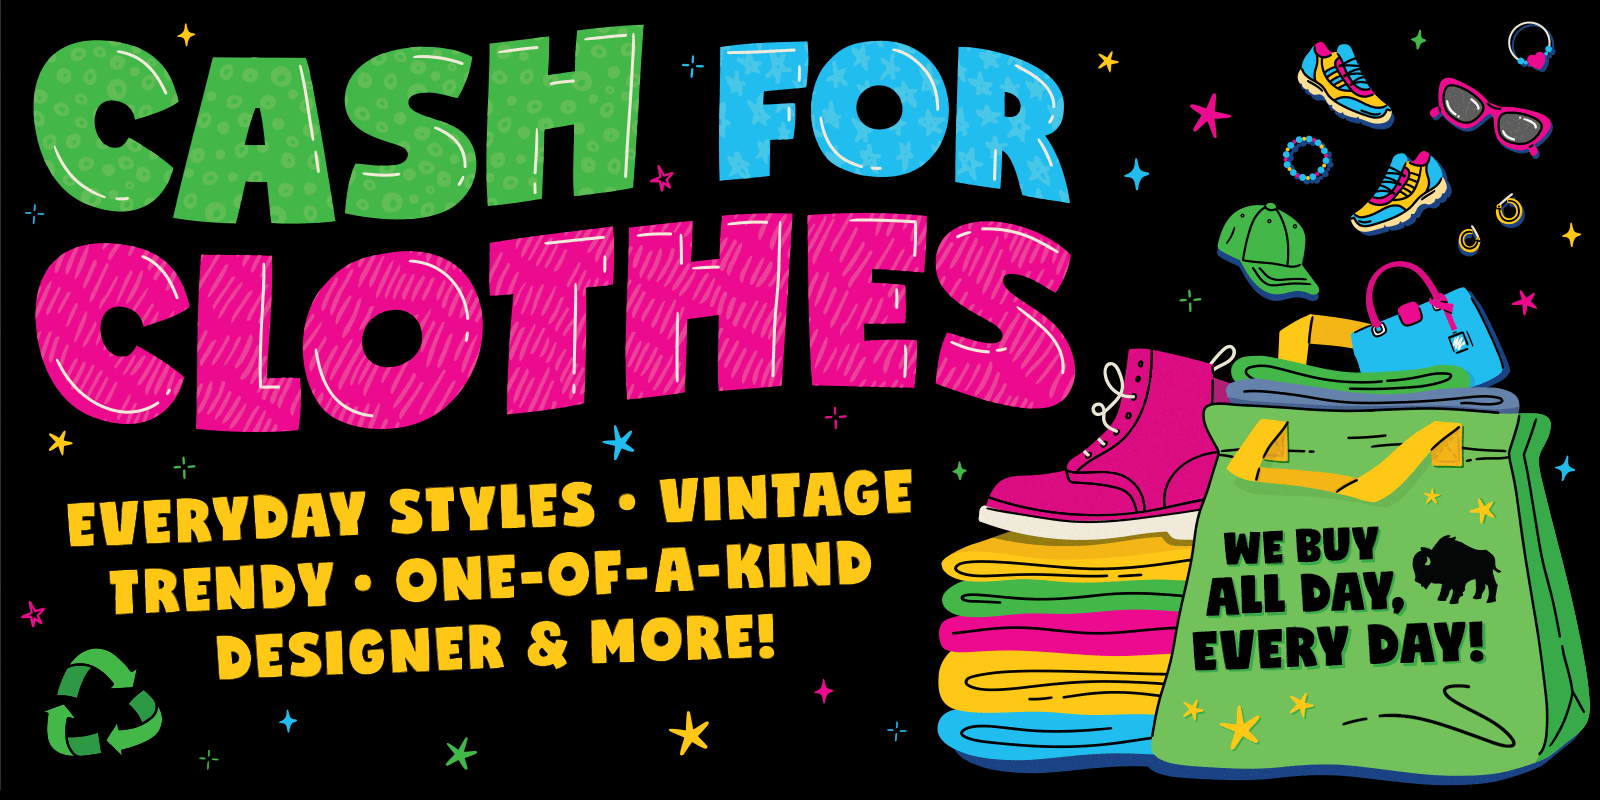 CASH FOR CLOTHES: We buy all day, every day—Everyday Styles—Vintage—Trendy—One-of-a-kind—Designer & More! [Clothes bag]